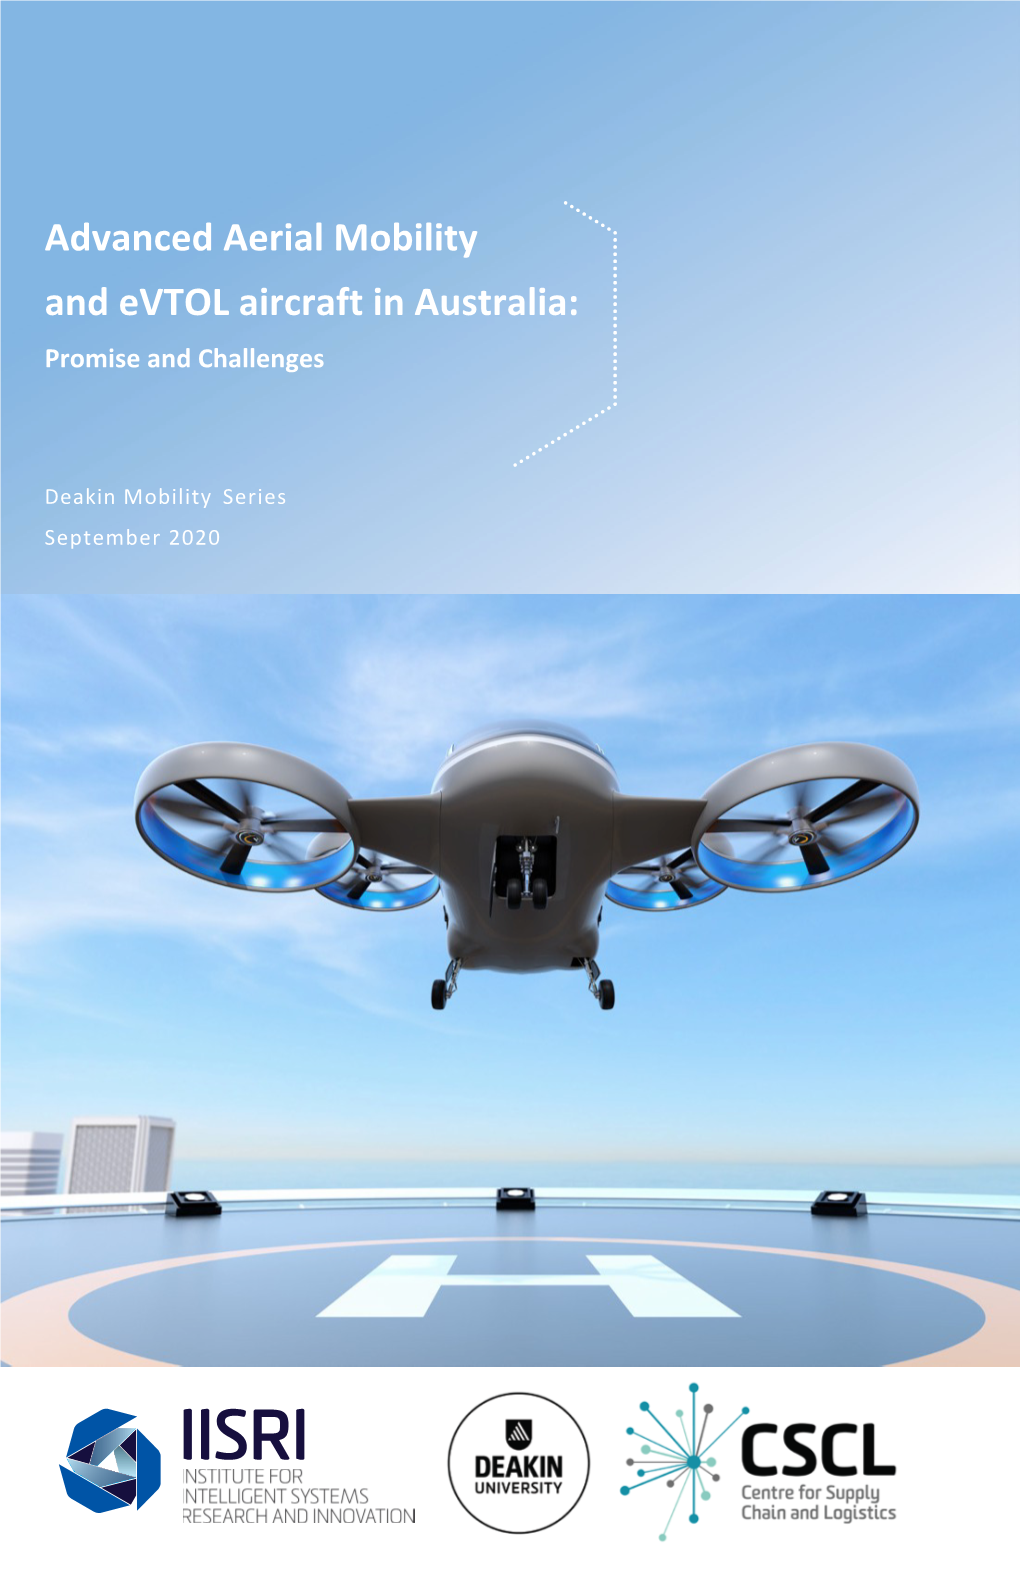 Advanced Aerial Mobility and Evtol Aircraft in Australia: Promise and Challenges